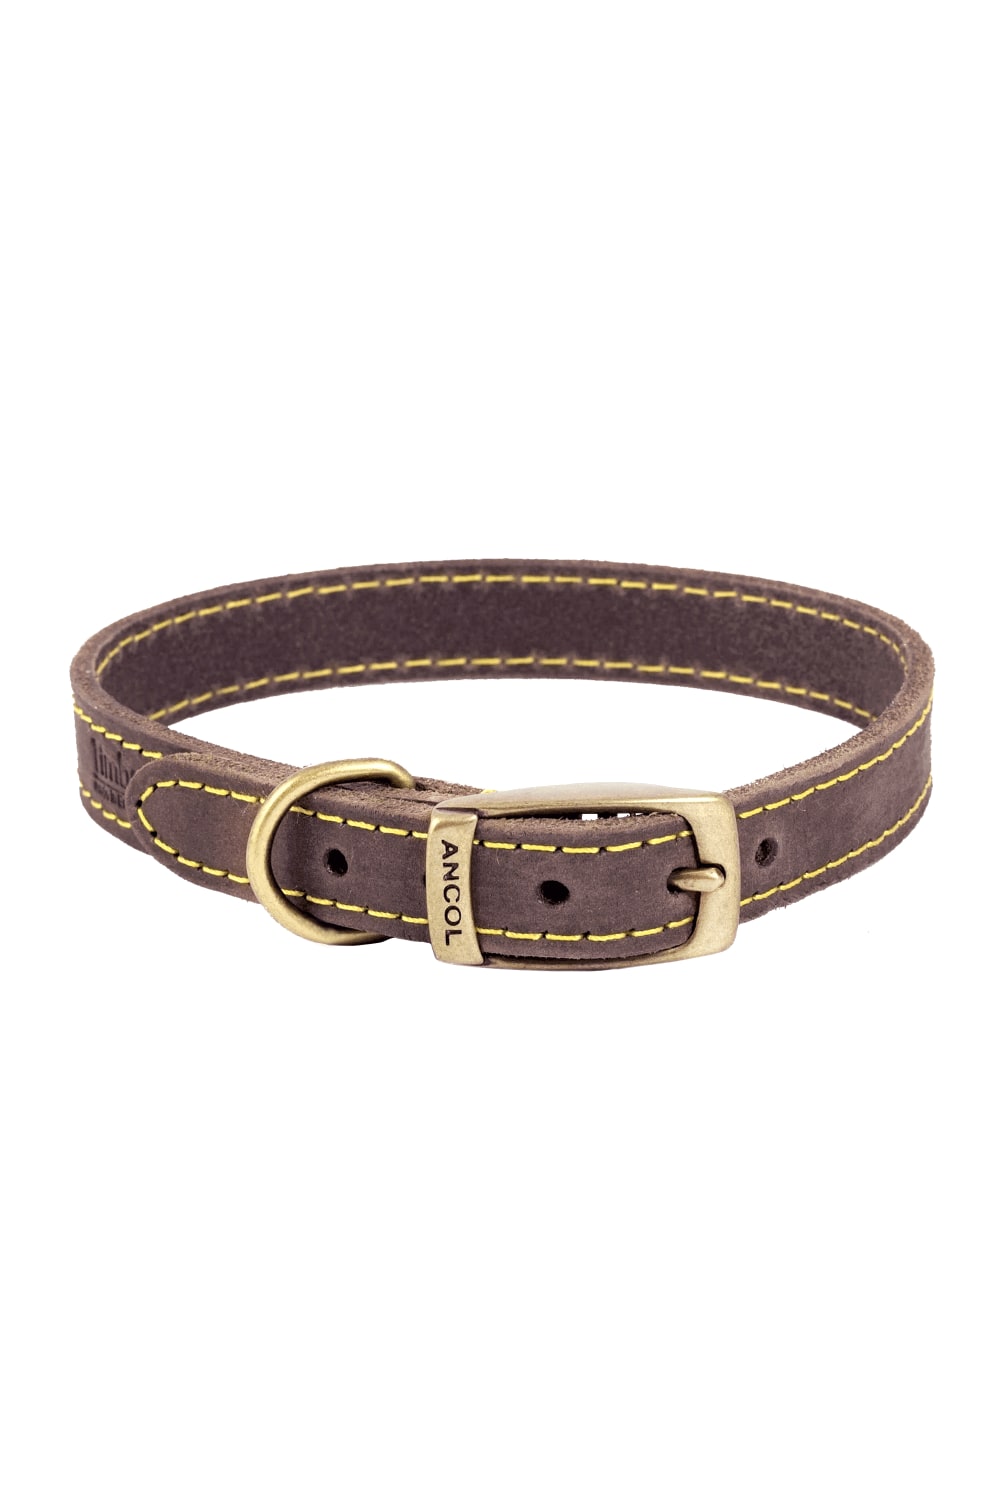 Ancol Pet Products Timberwolf Leather Collar (7.8-10.2in (Size 1))